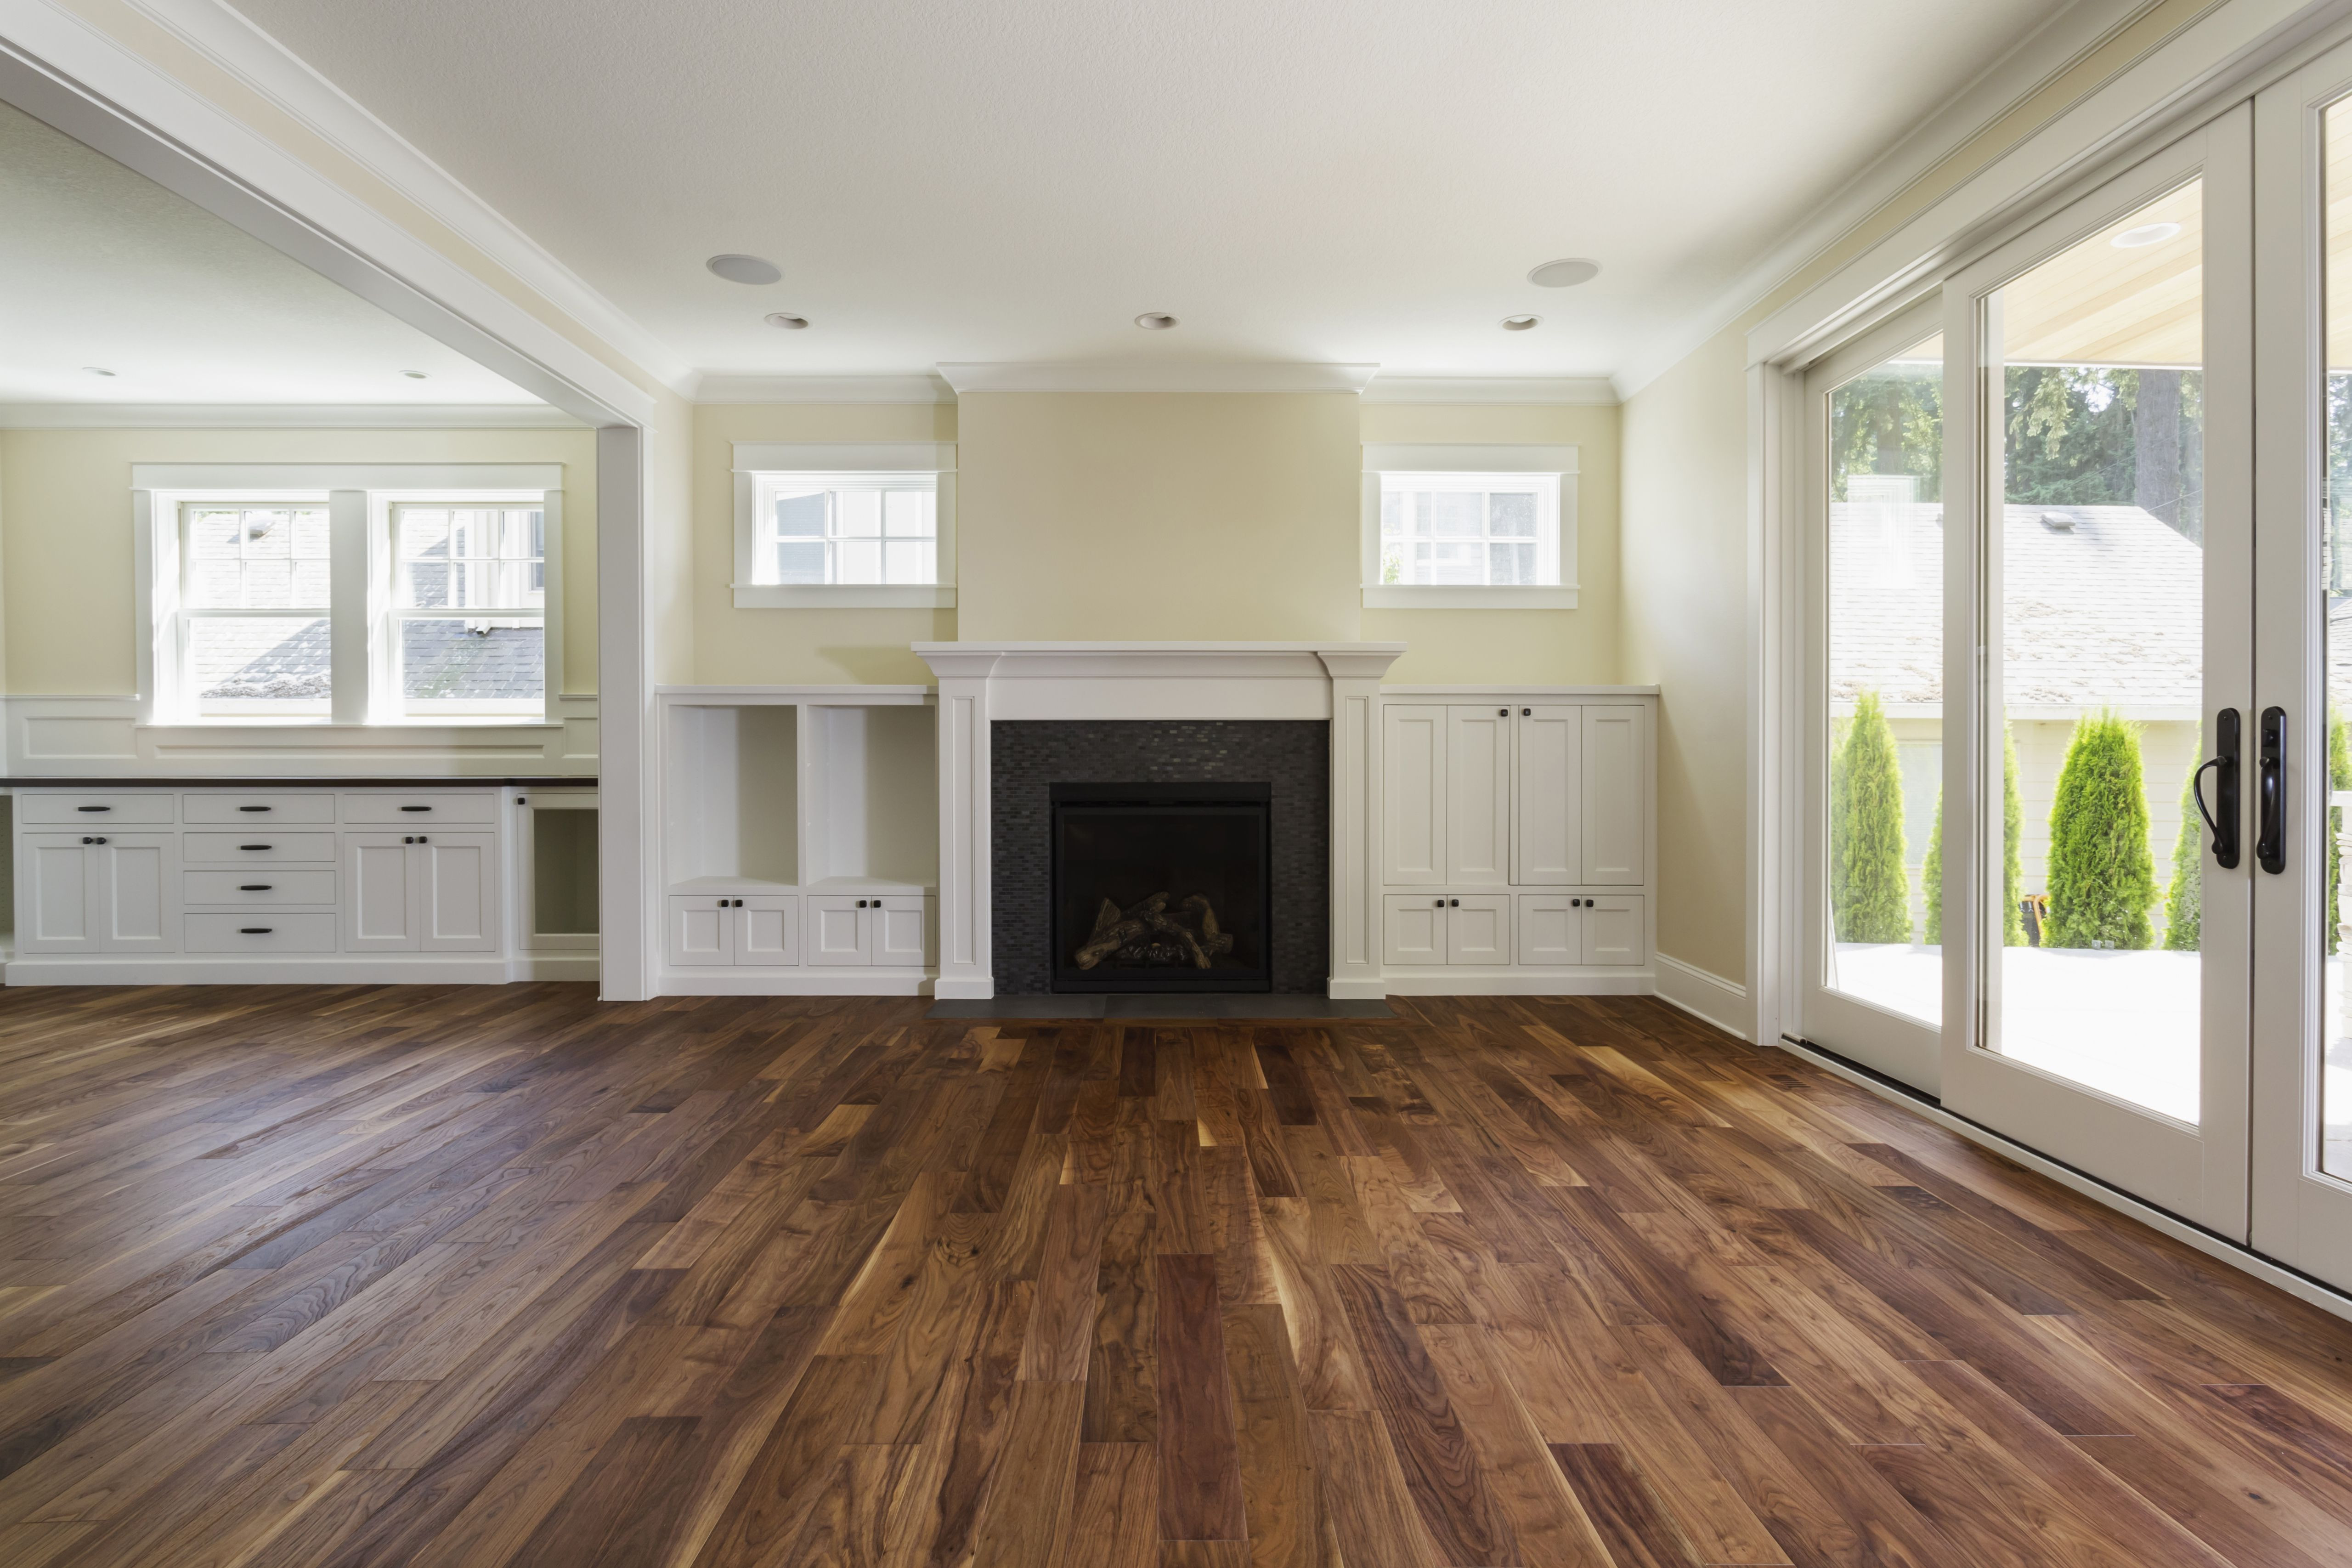 13 Great Diamond W Hardwood Flooring 2024 free download diamond w hardwood flooring of the pros and cons of prefinished hardwood flooring for fireplace and built in shelves in living room 482143011 57bef8e33df78cc16e035397